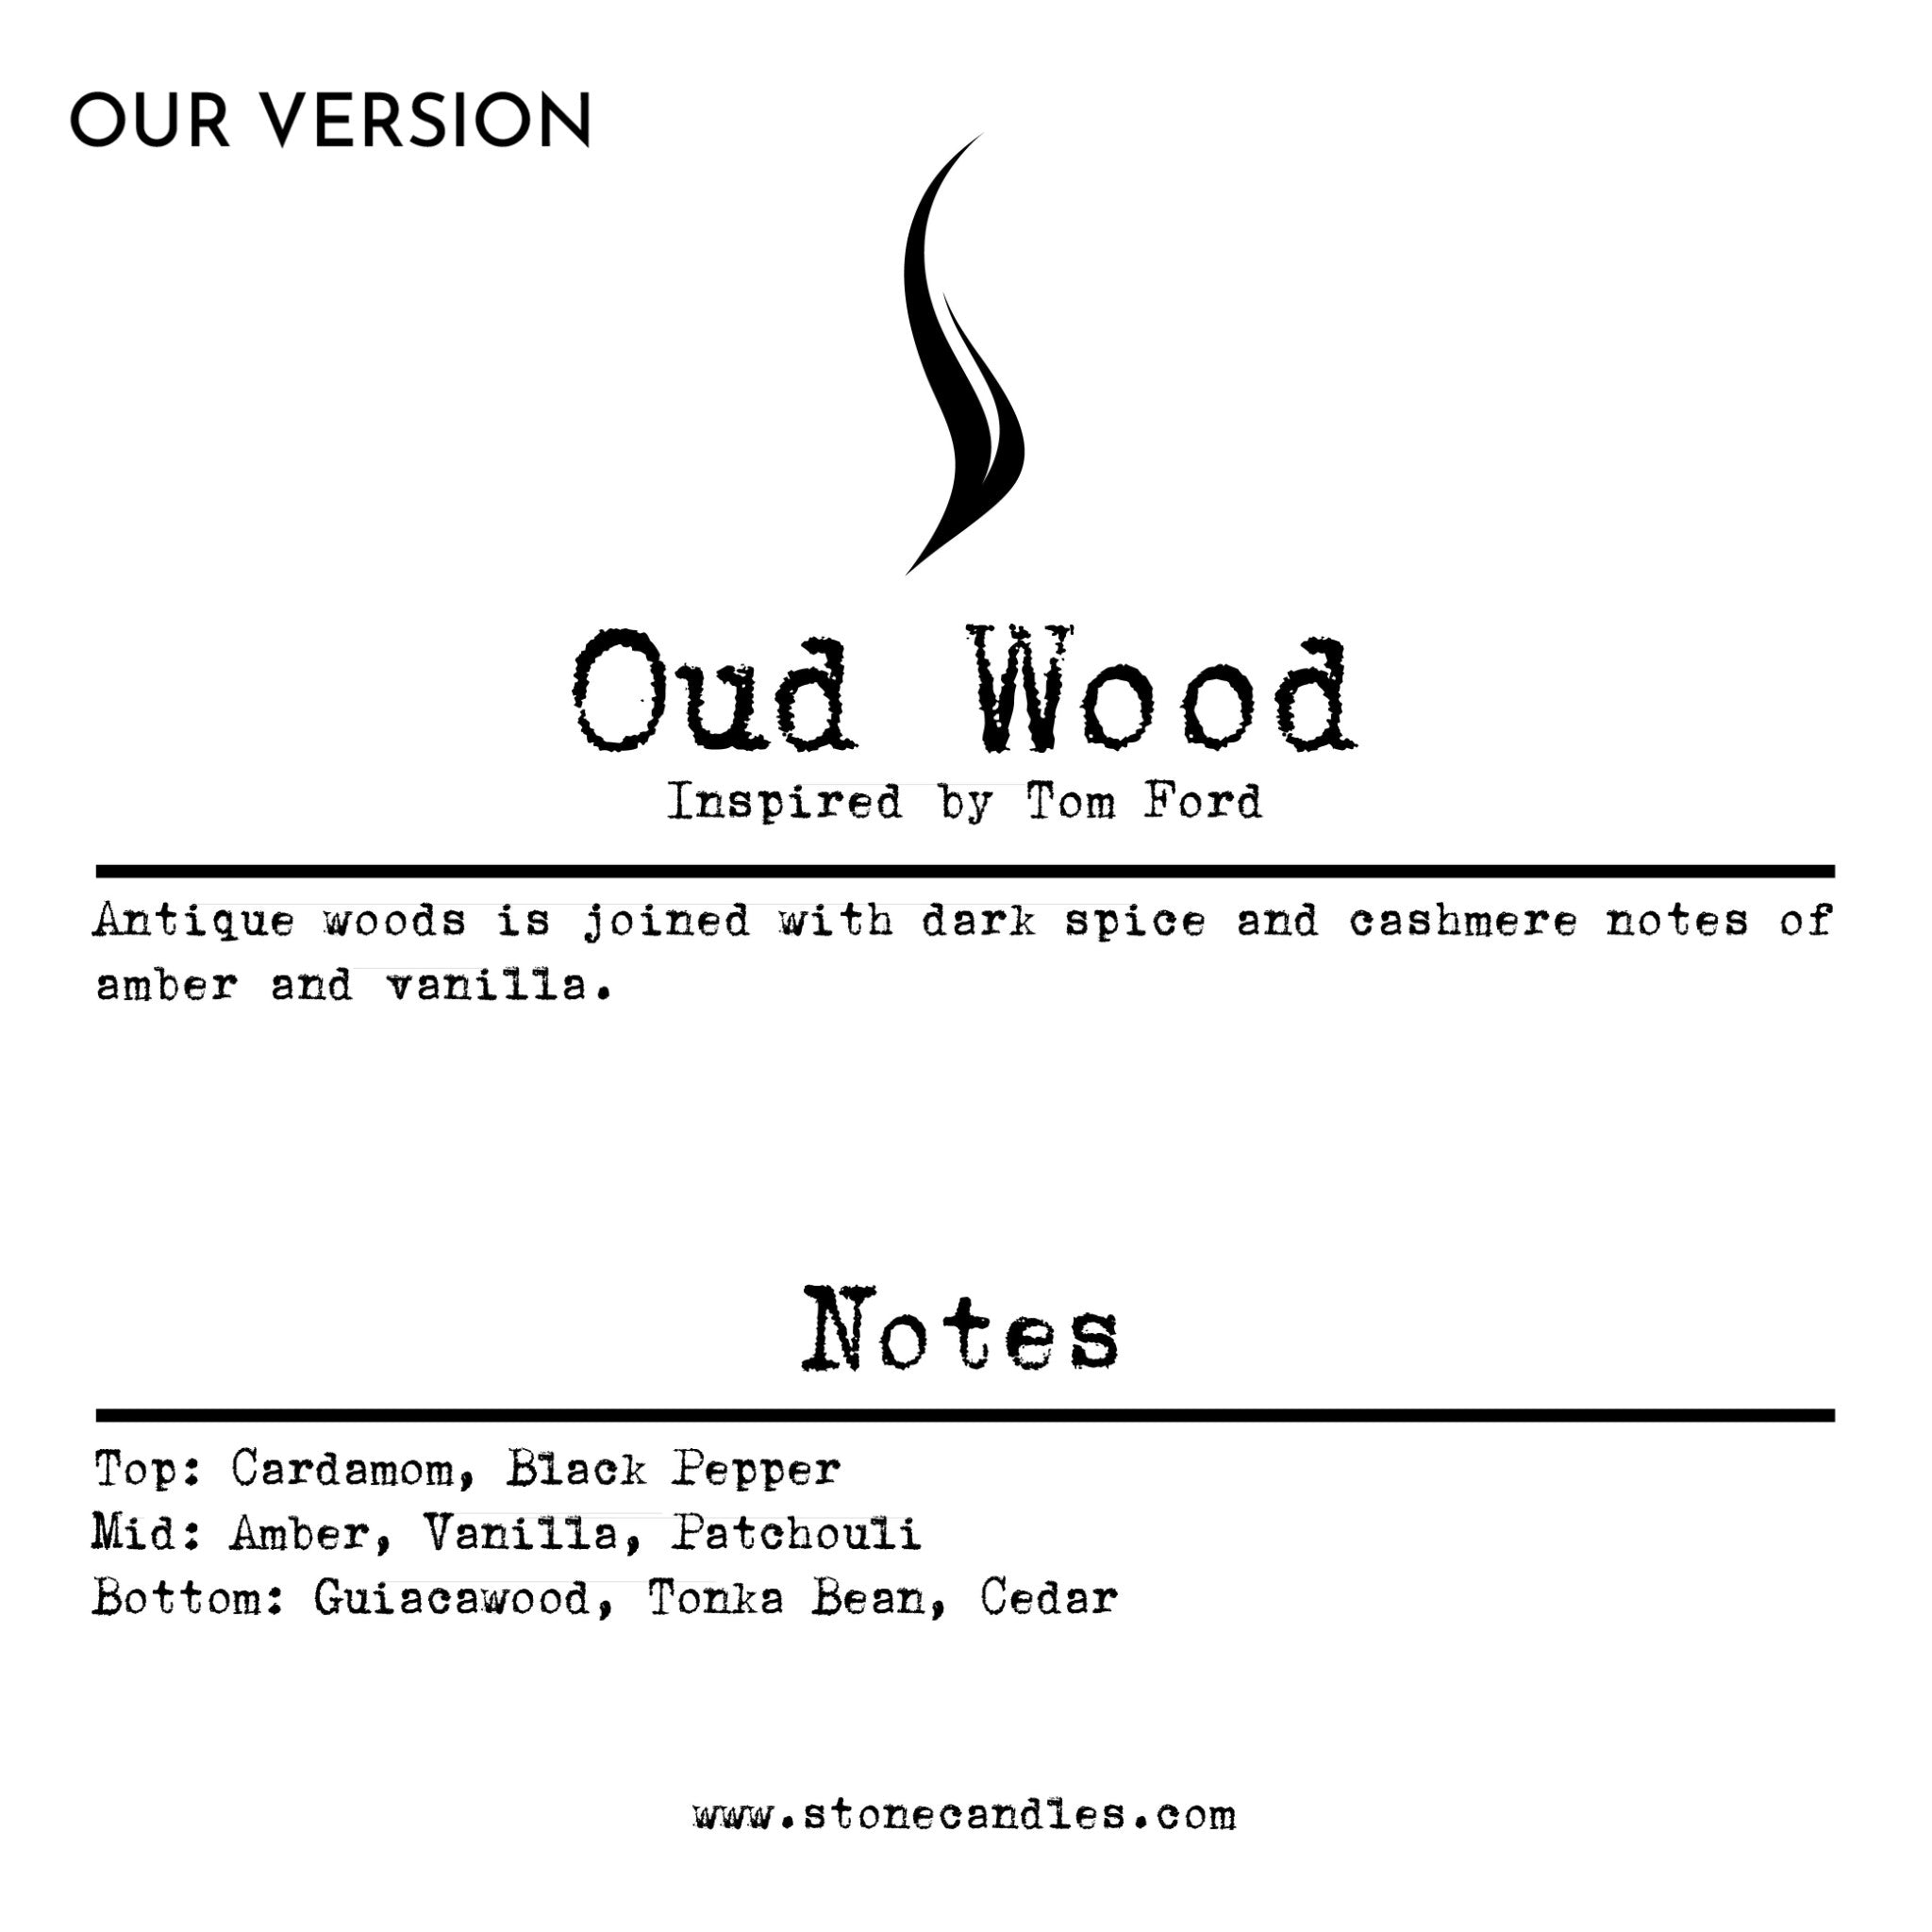 Oud Wood (our version) Sample Scent Strip